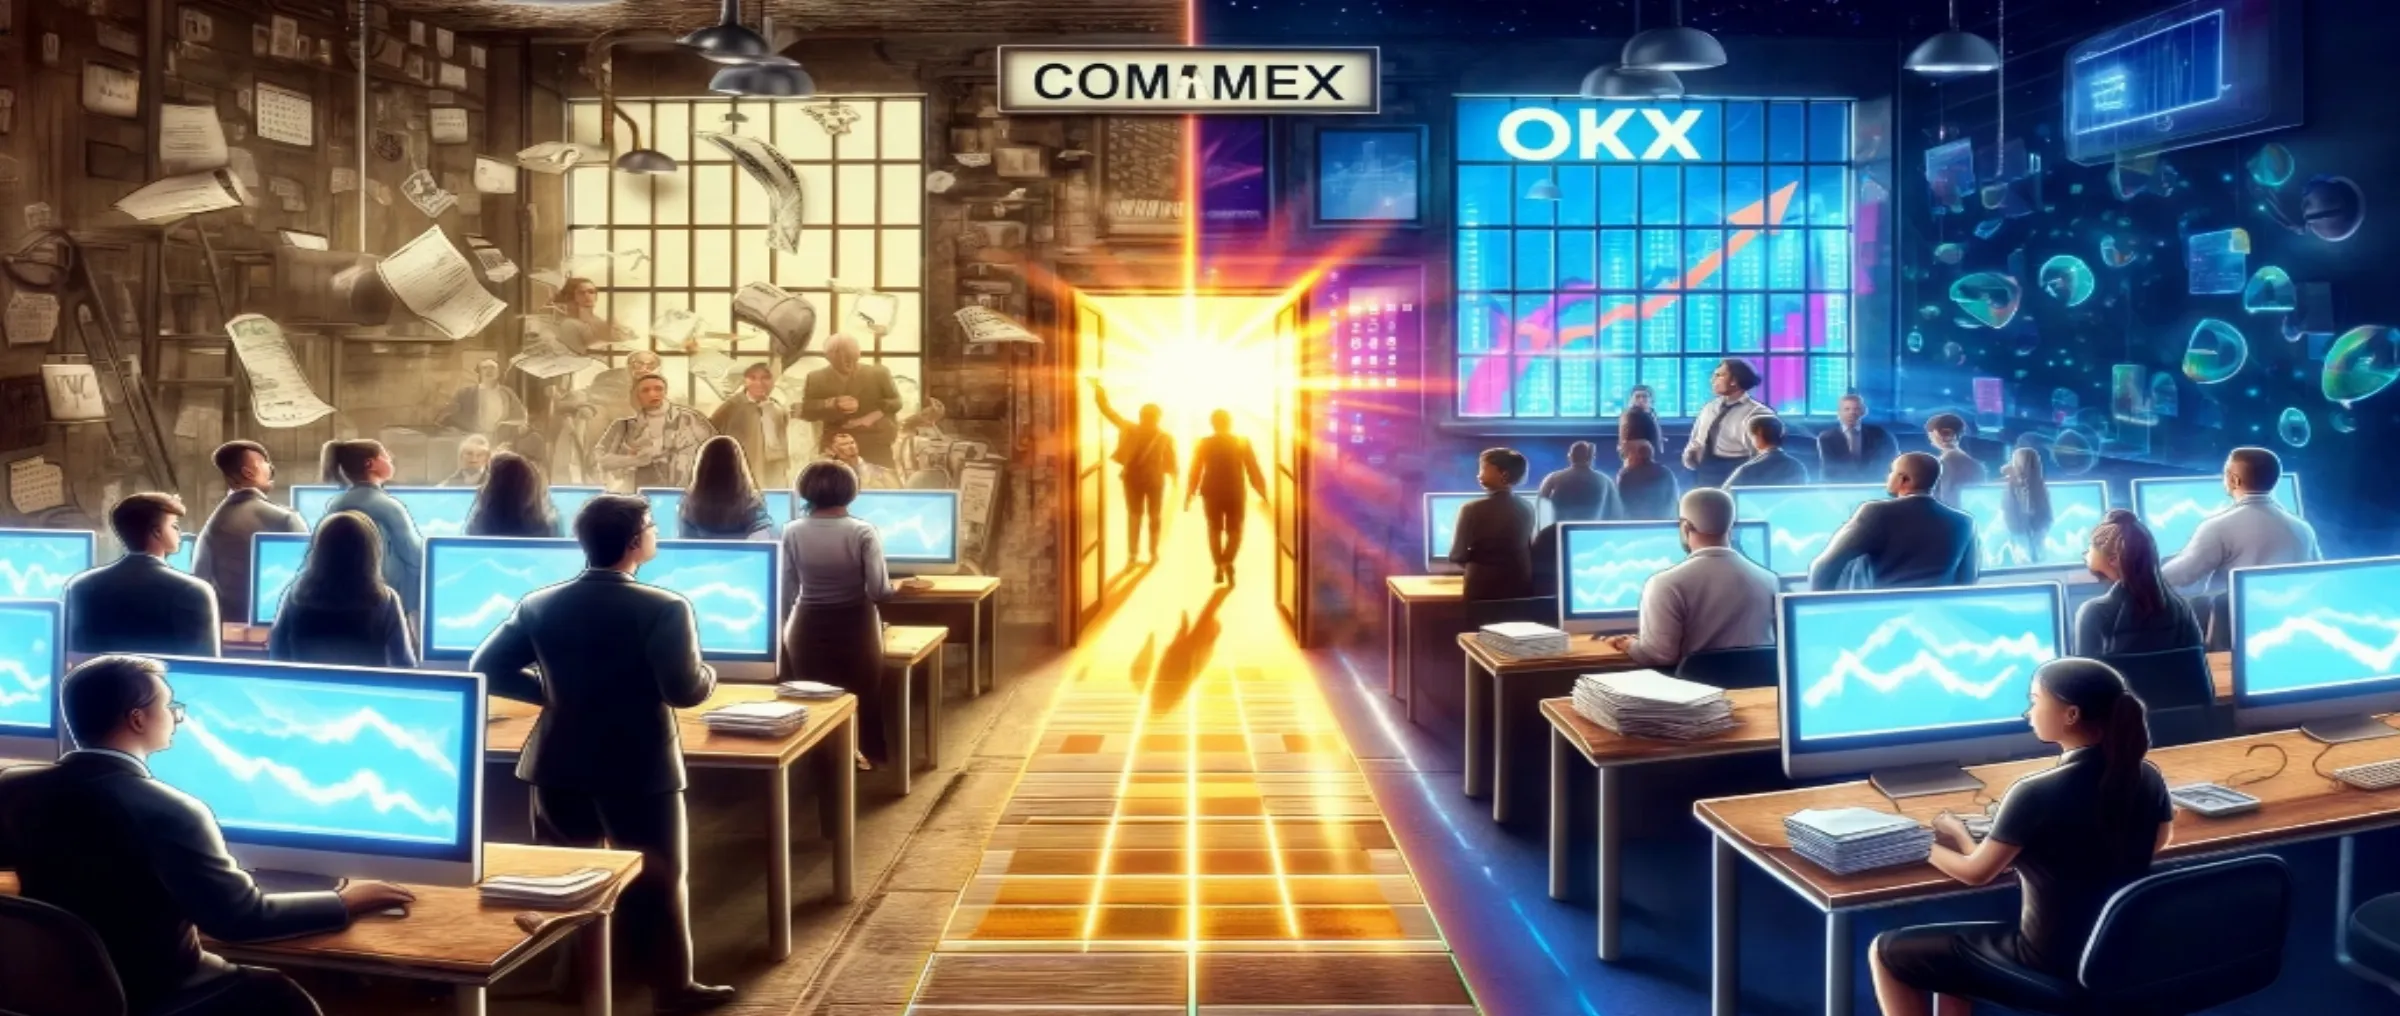 Users switch to OKX after CommEX stops working